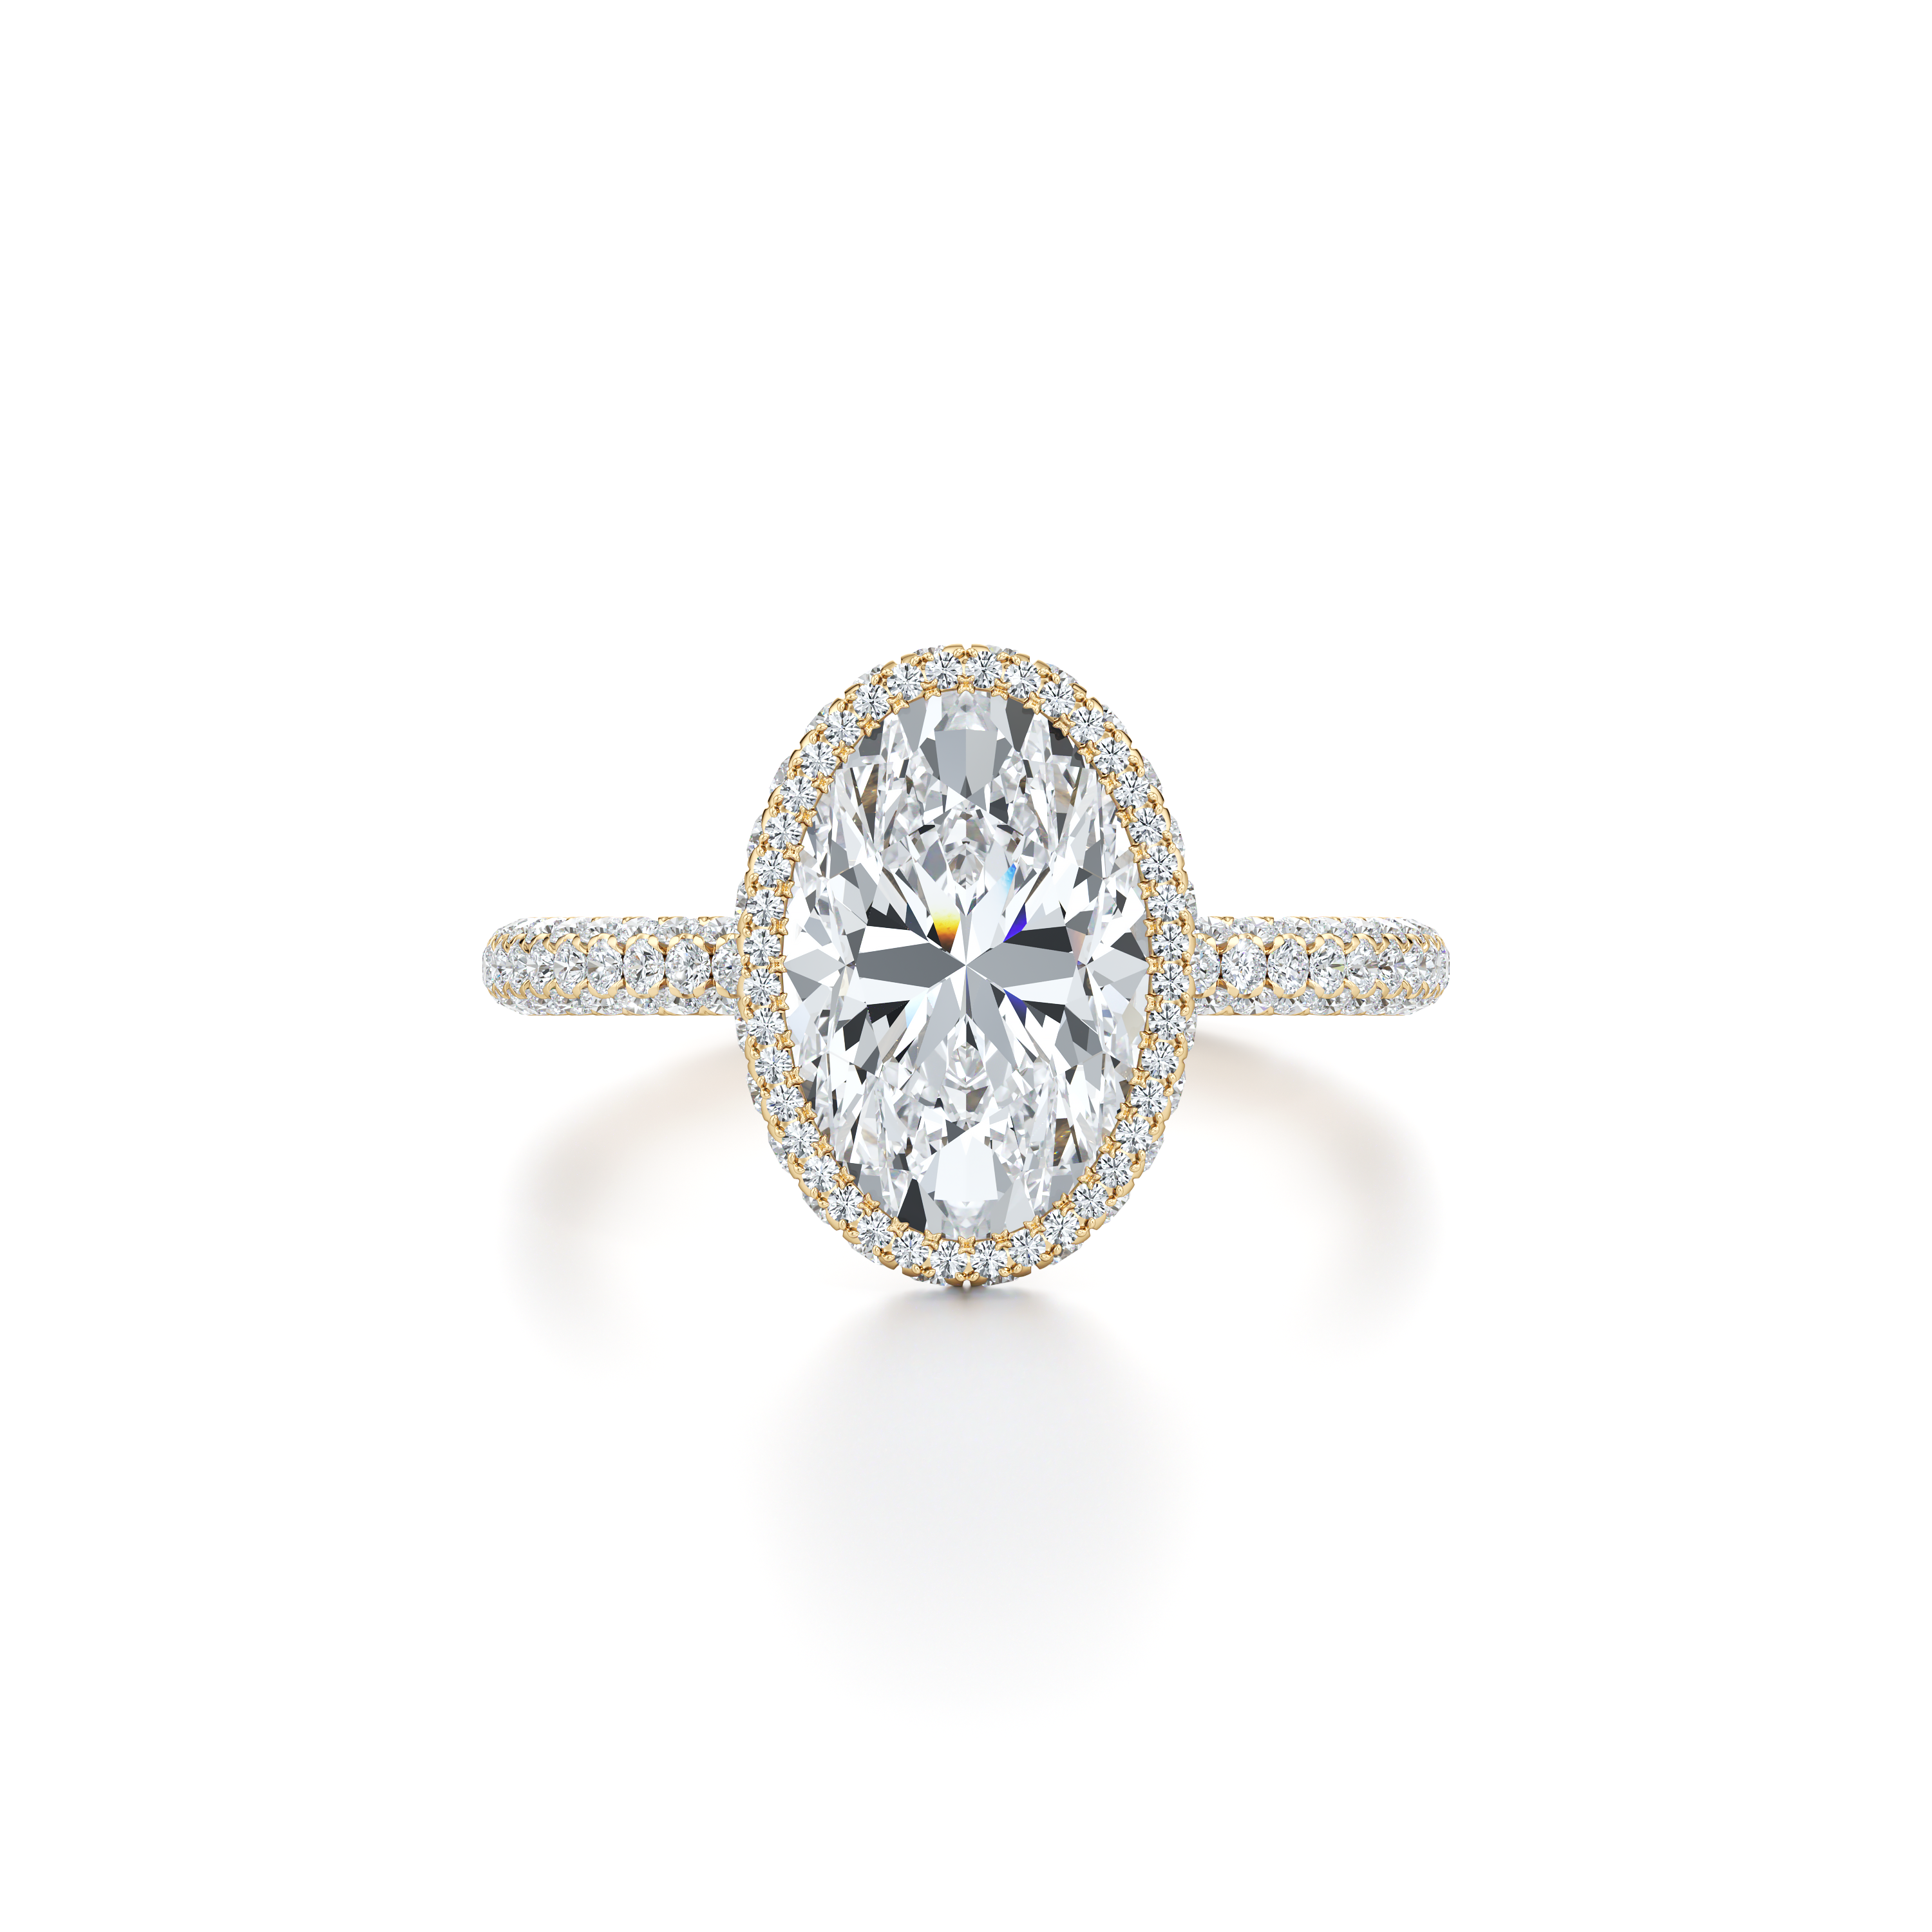 Plat 4 Row Diamond Engagement Ring with Round Center